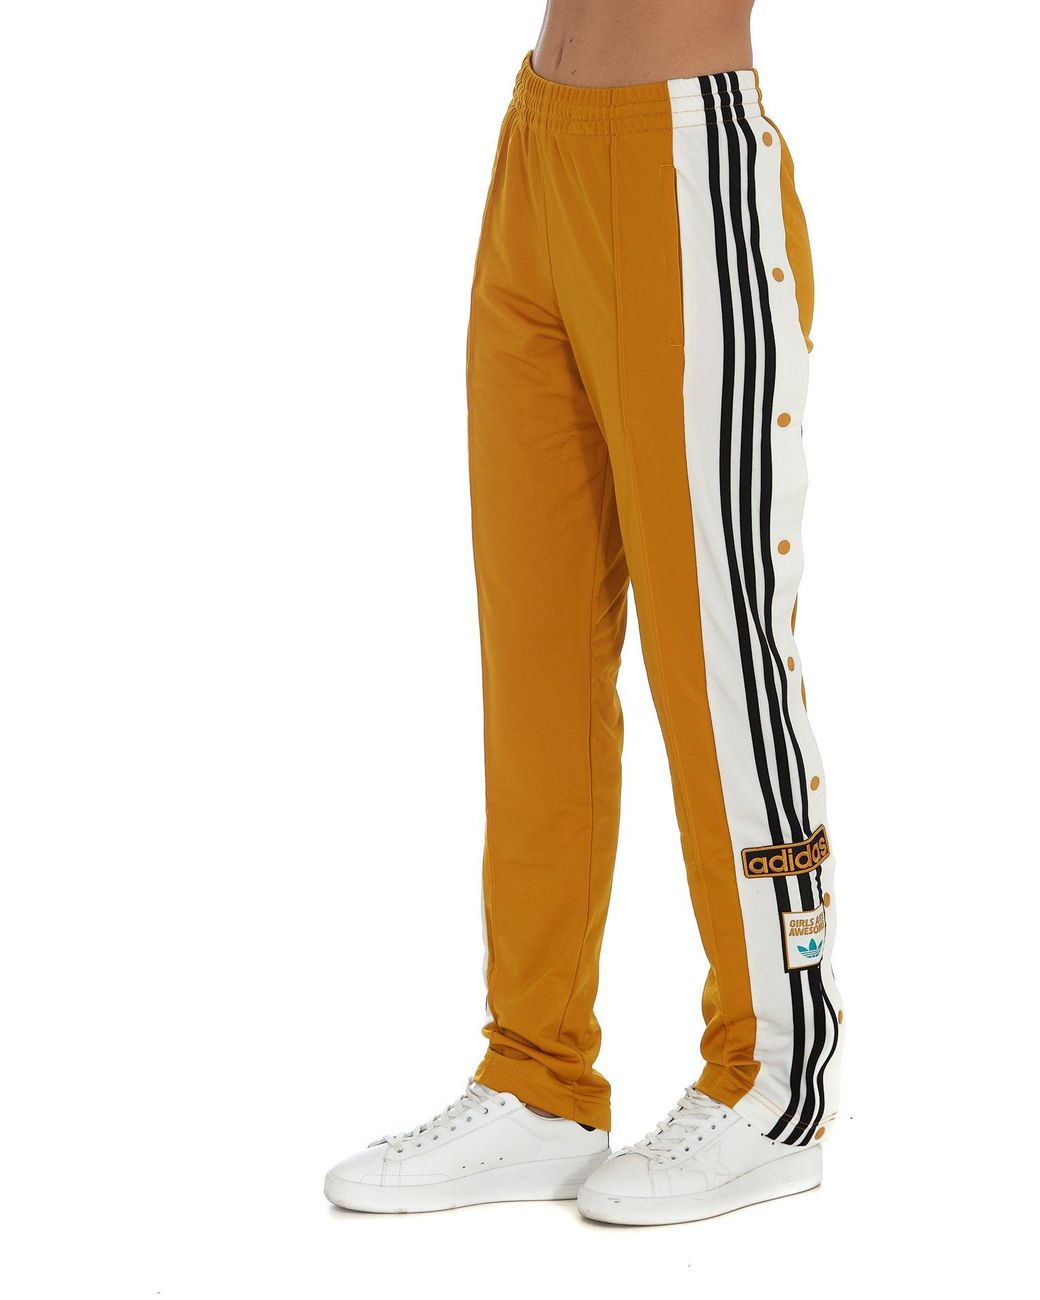 Originals Girls Are Awesome Adibreak Pants in Yellow | Lyst